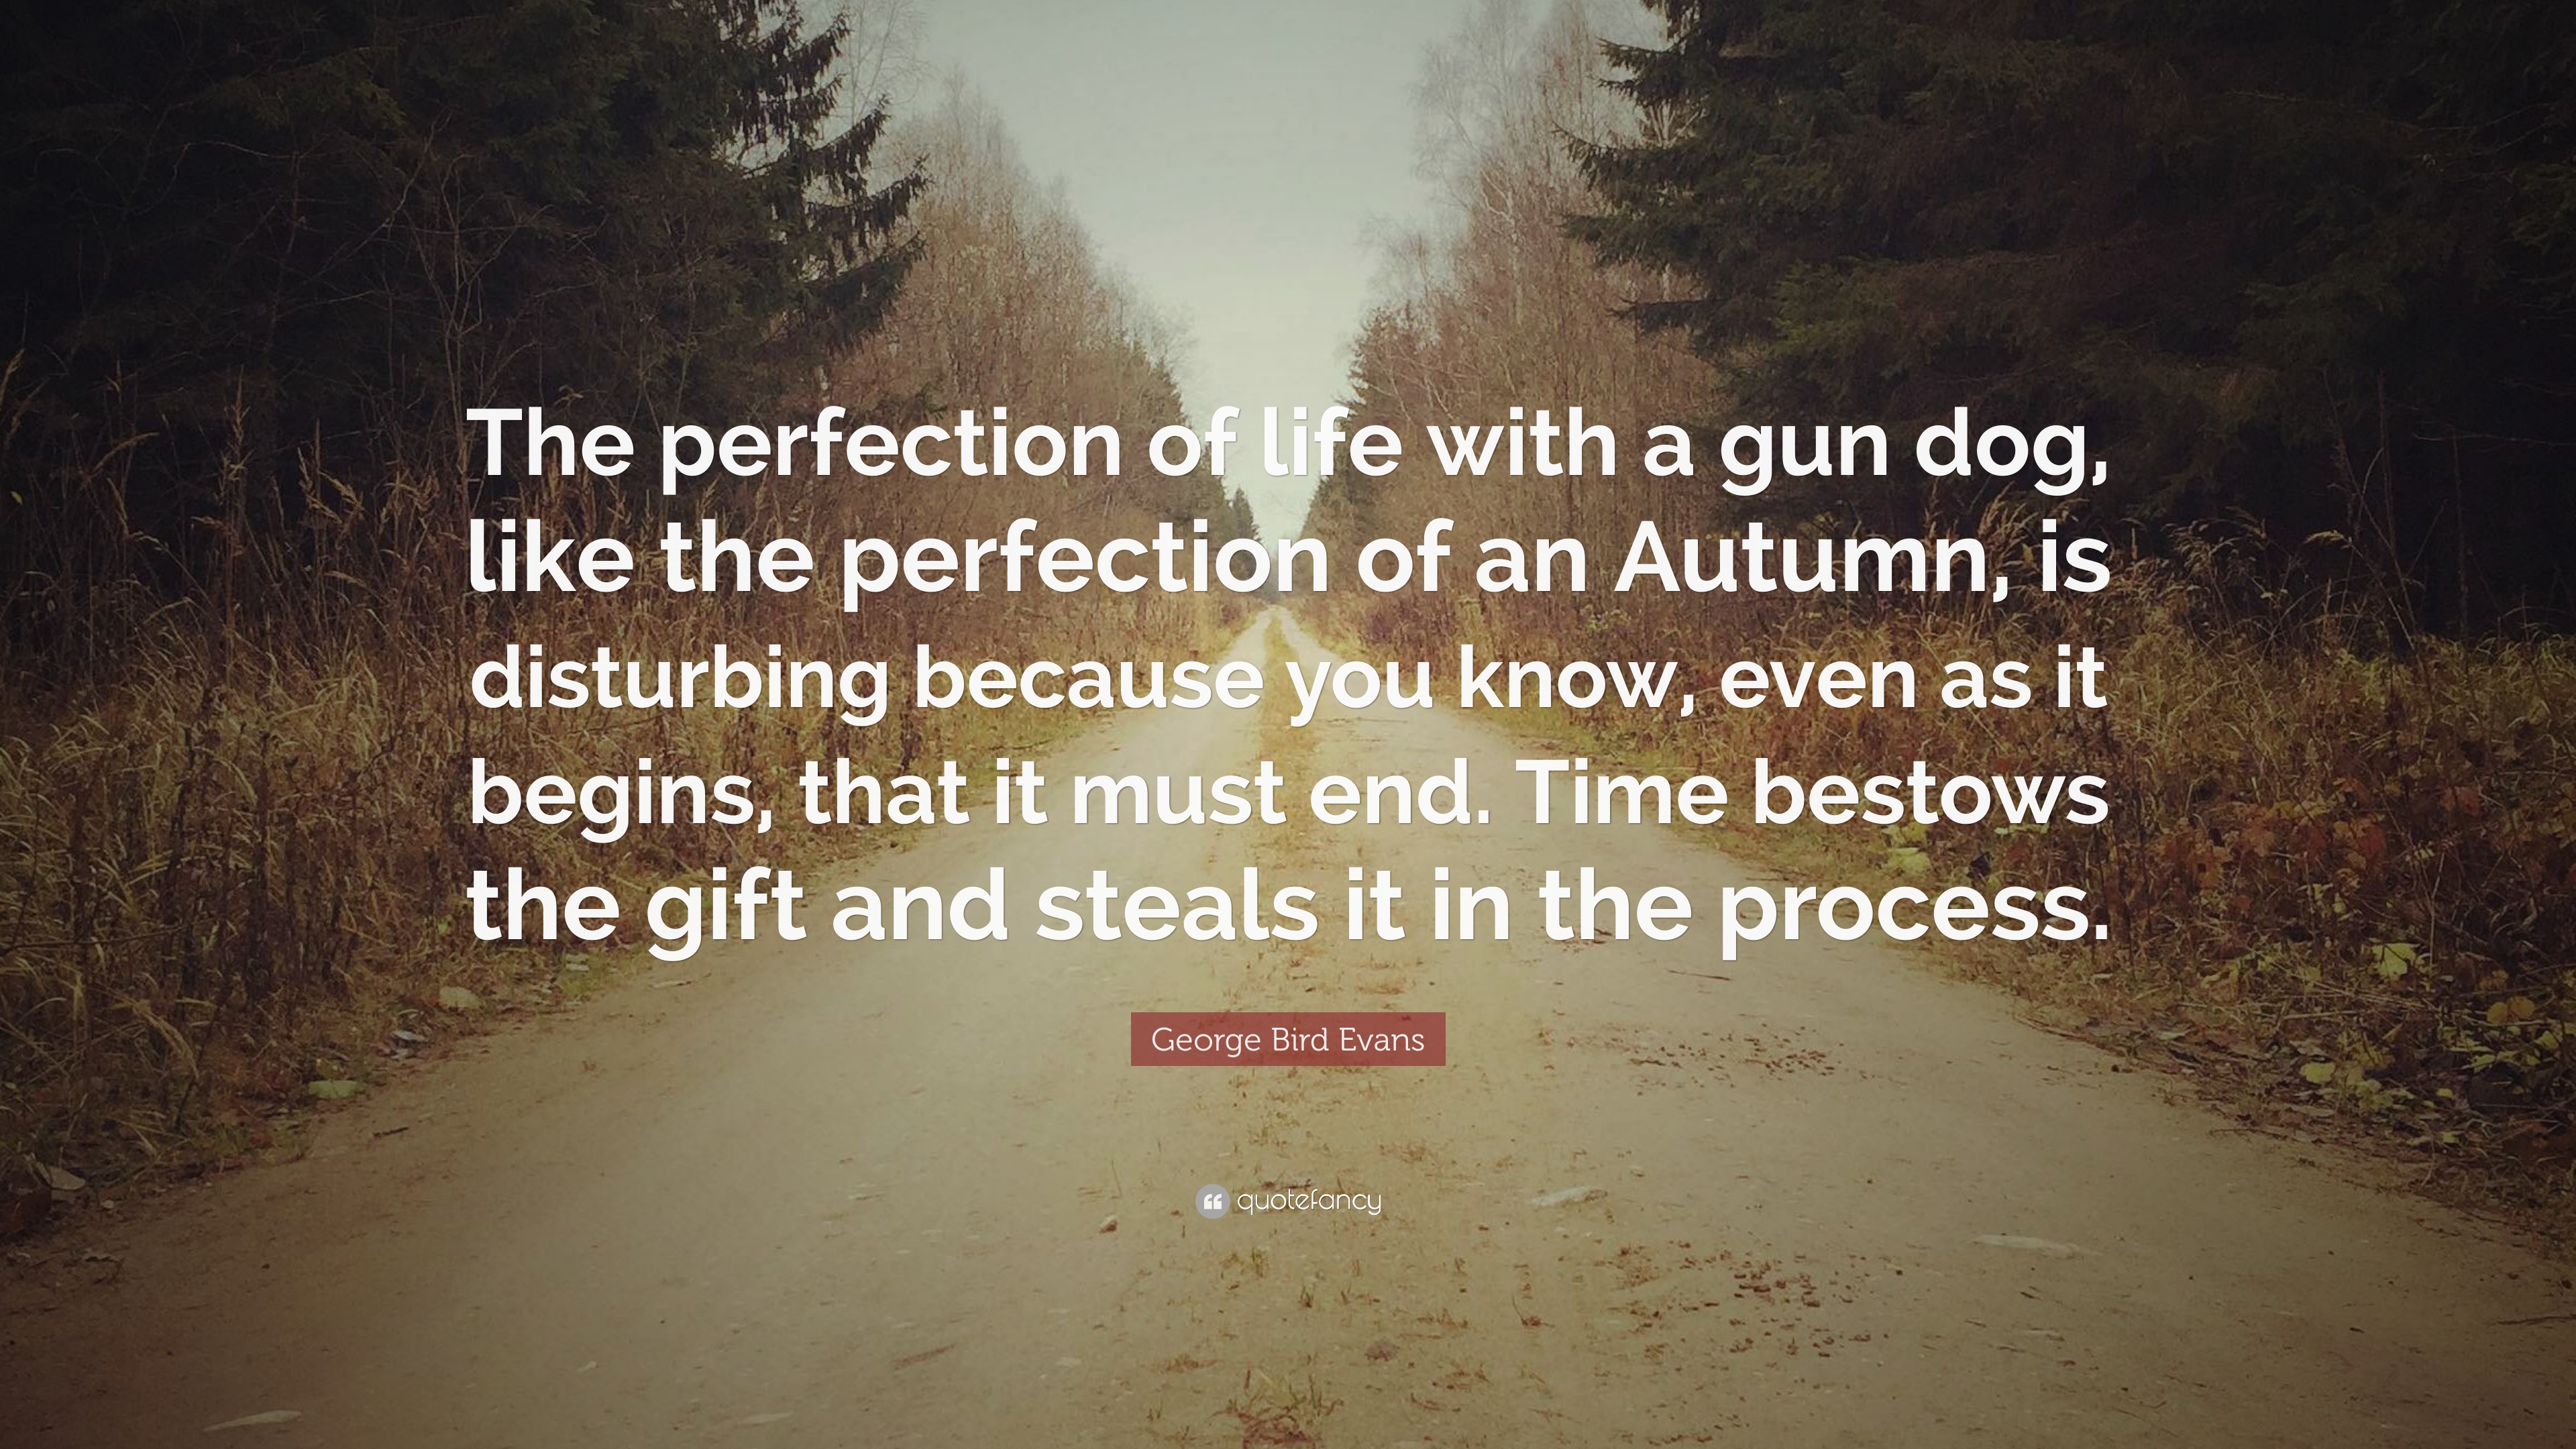 George Bird Evans Quote: “The perfection of life with a gun dog